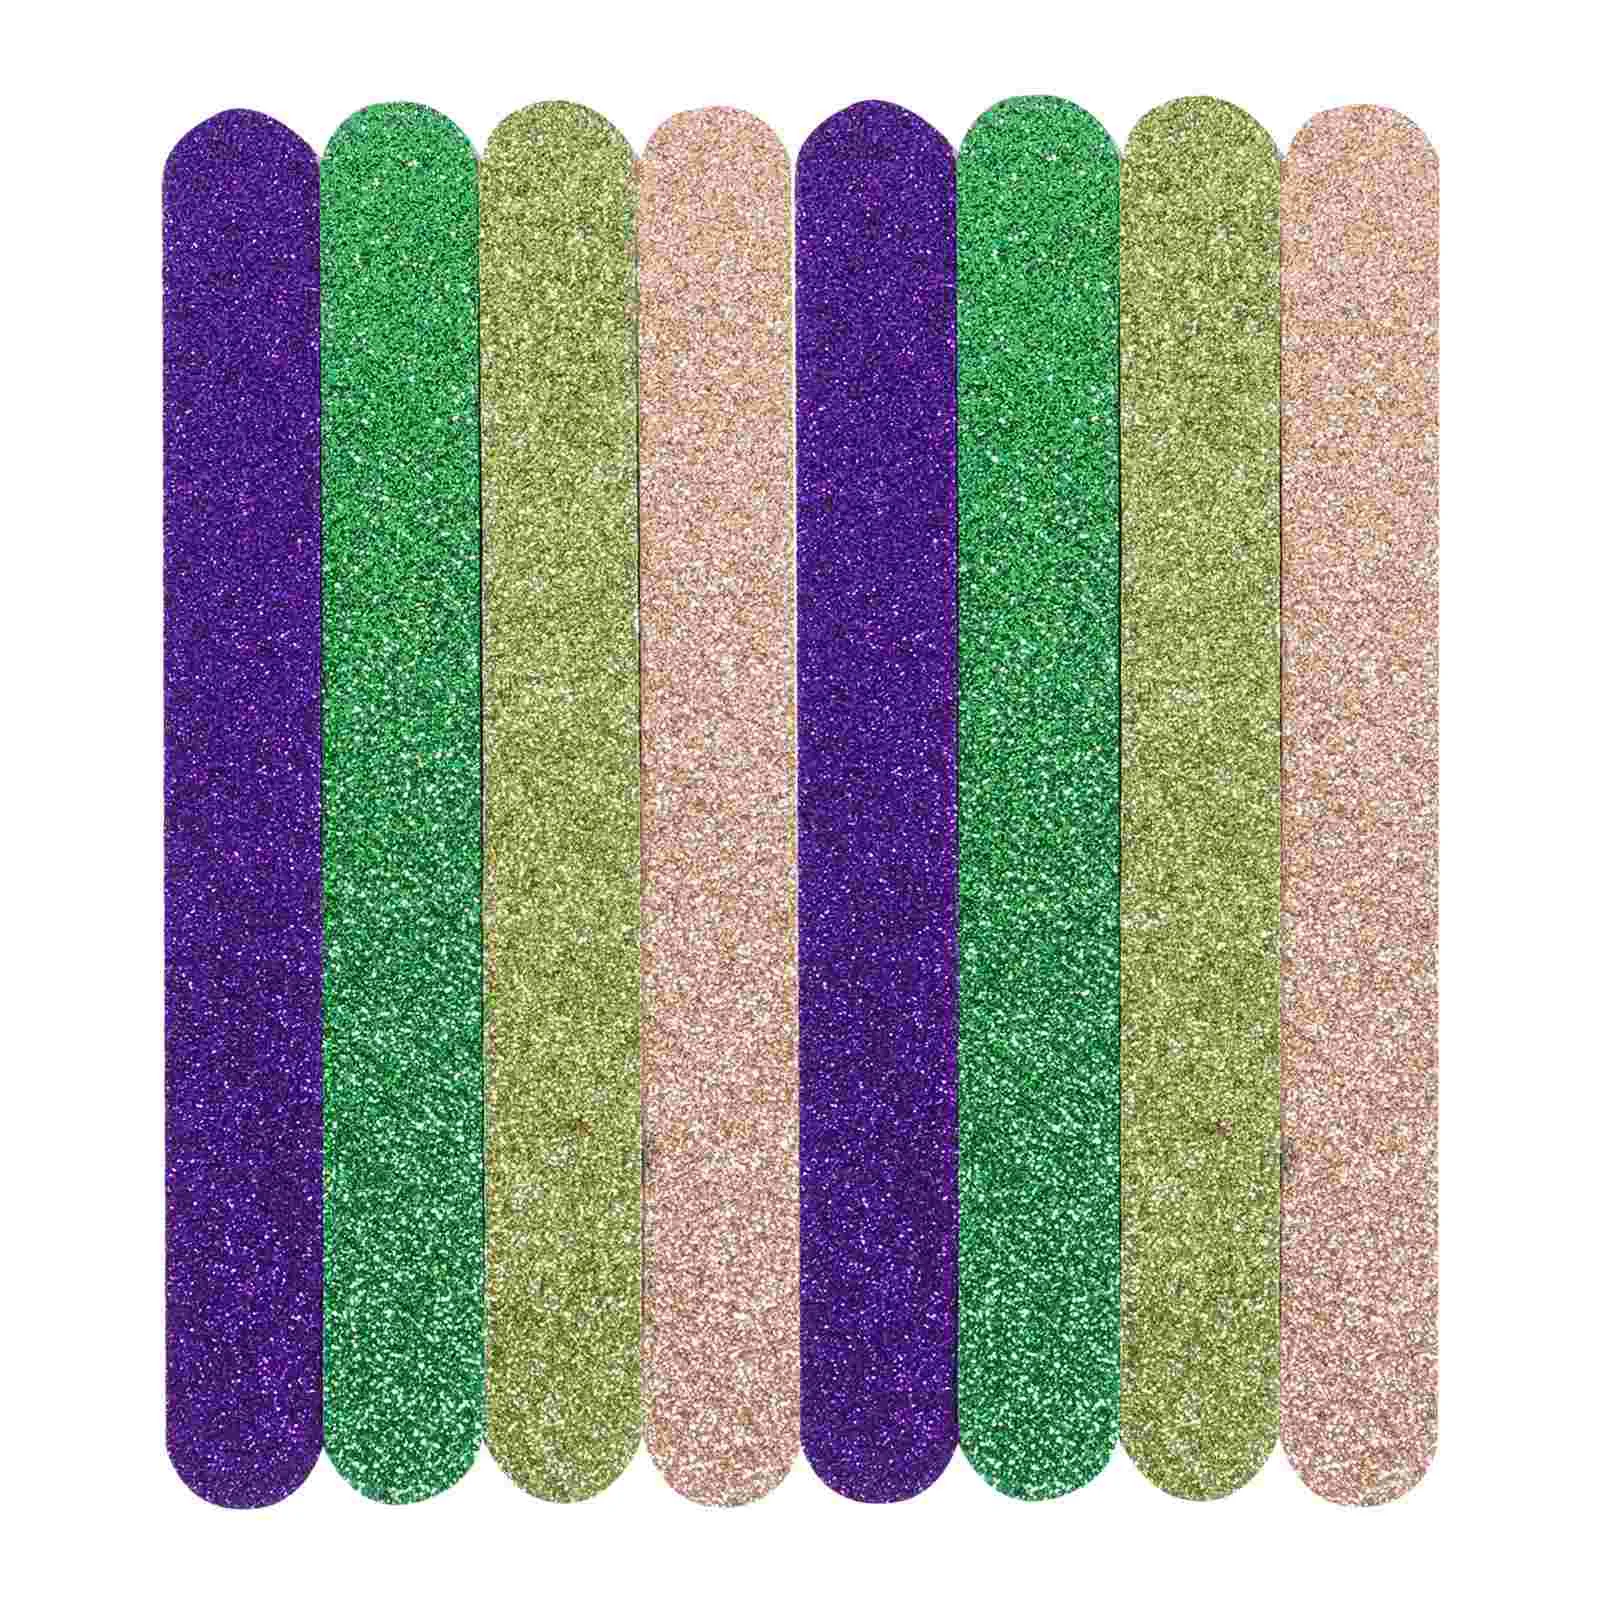 

20 Pcs Glitter Nail File Emery Boards Files Pedicure Natural Nails Grit Professional Women Acrylic King Manicure Care